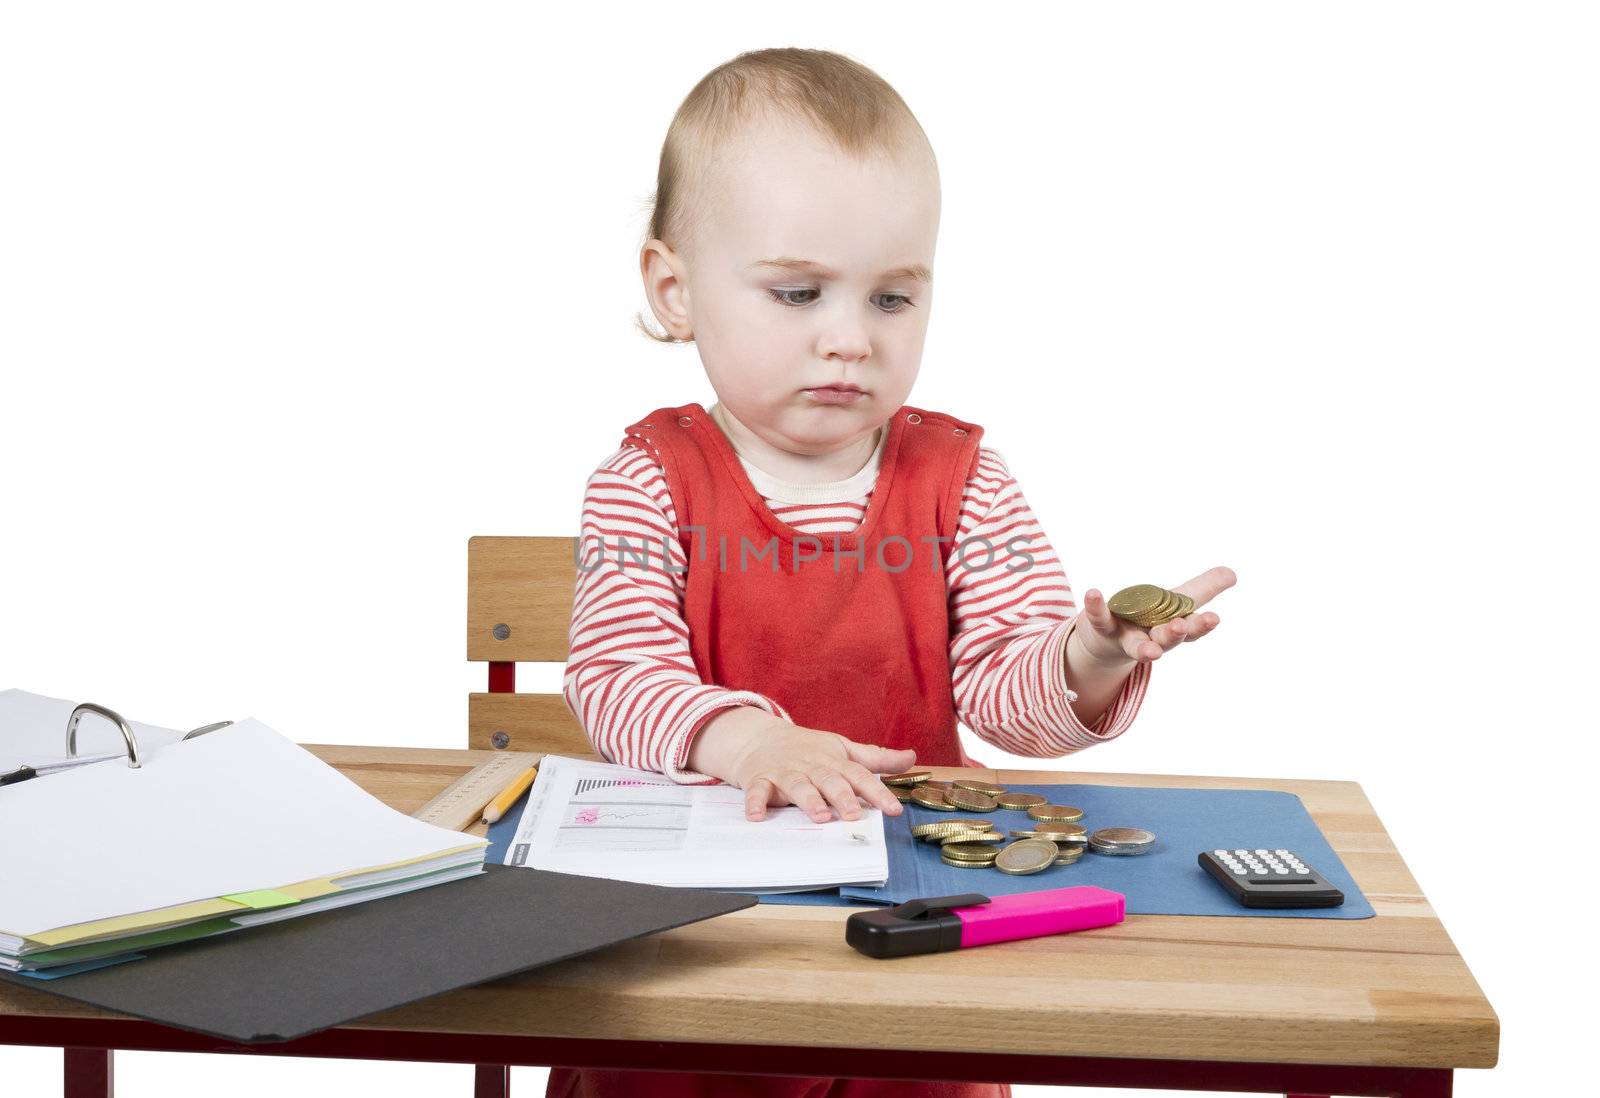 young child working at writing desk in light background